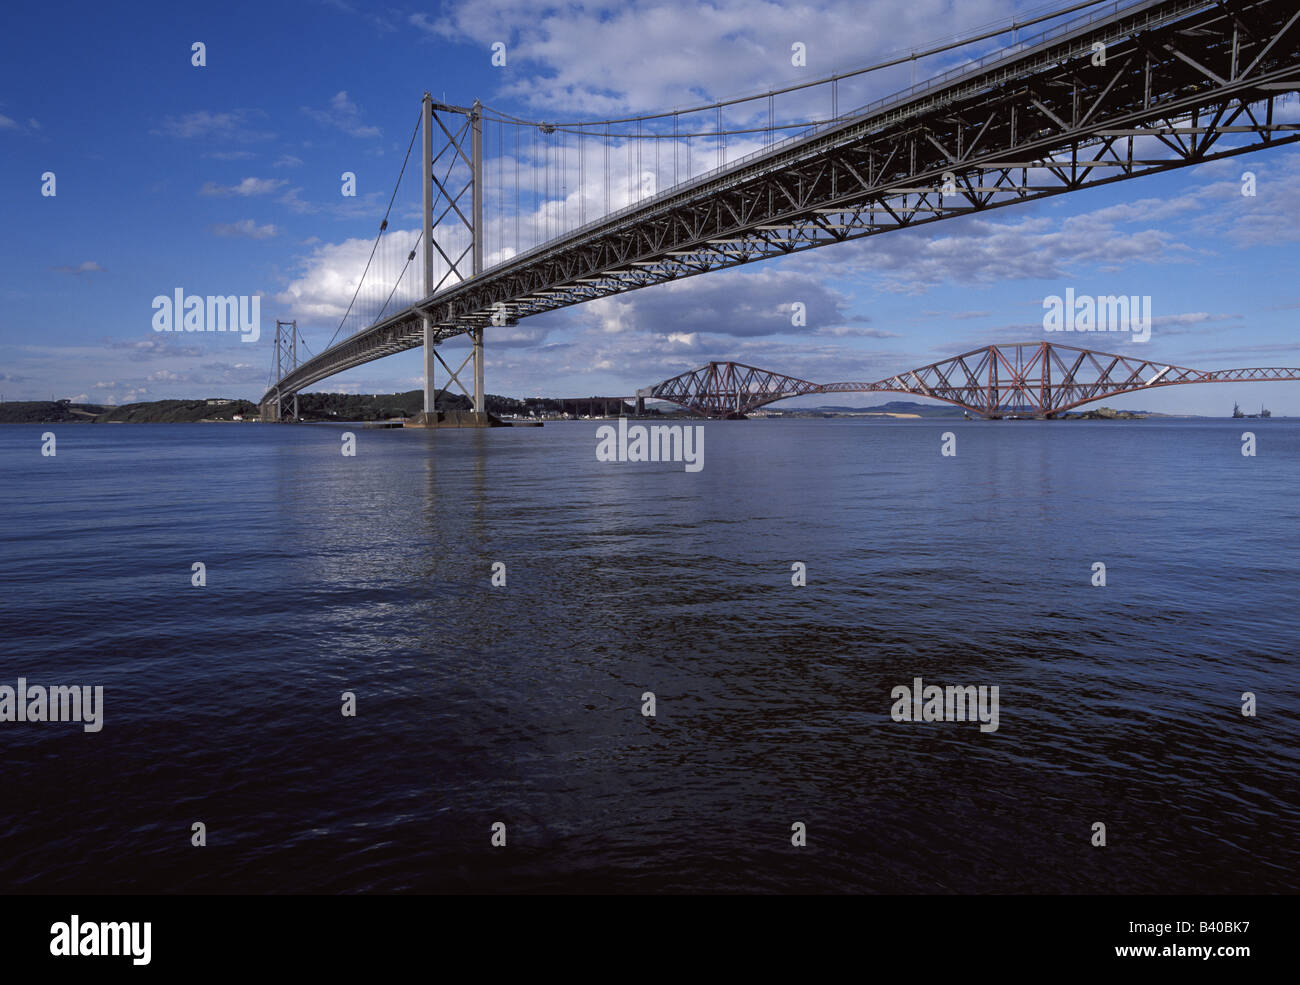 dh Forth Road Bridge FORTH BRIDGE FORTH BRIDGE Firth of forth road and railway bridges river scotland low angle view Stock Photo